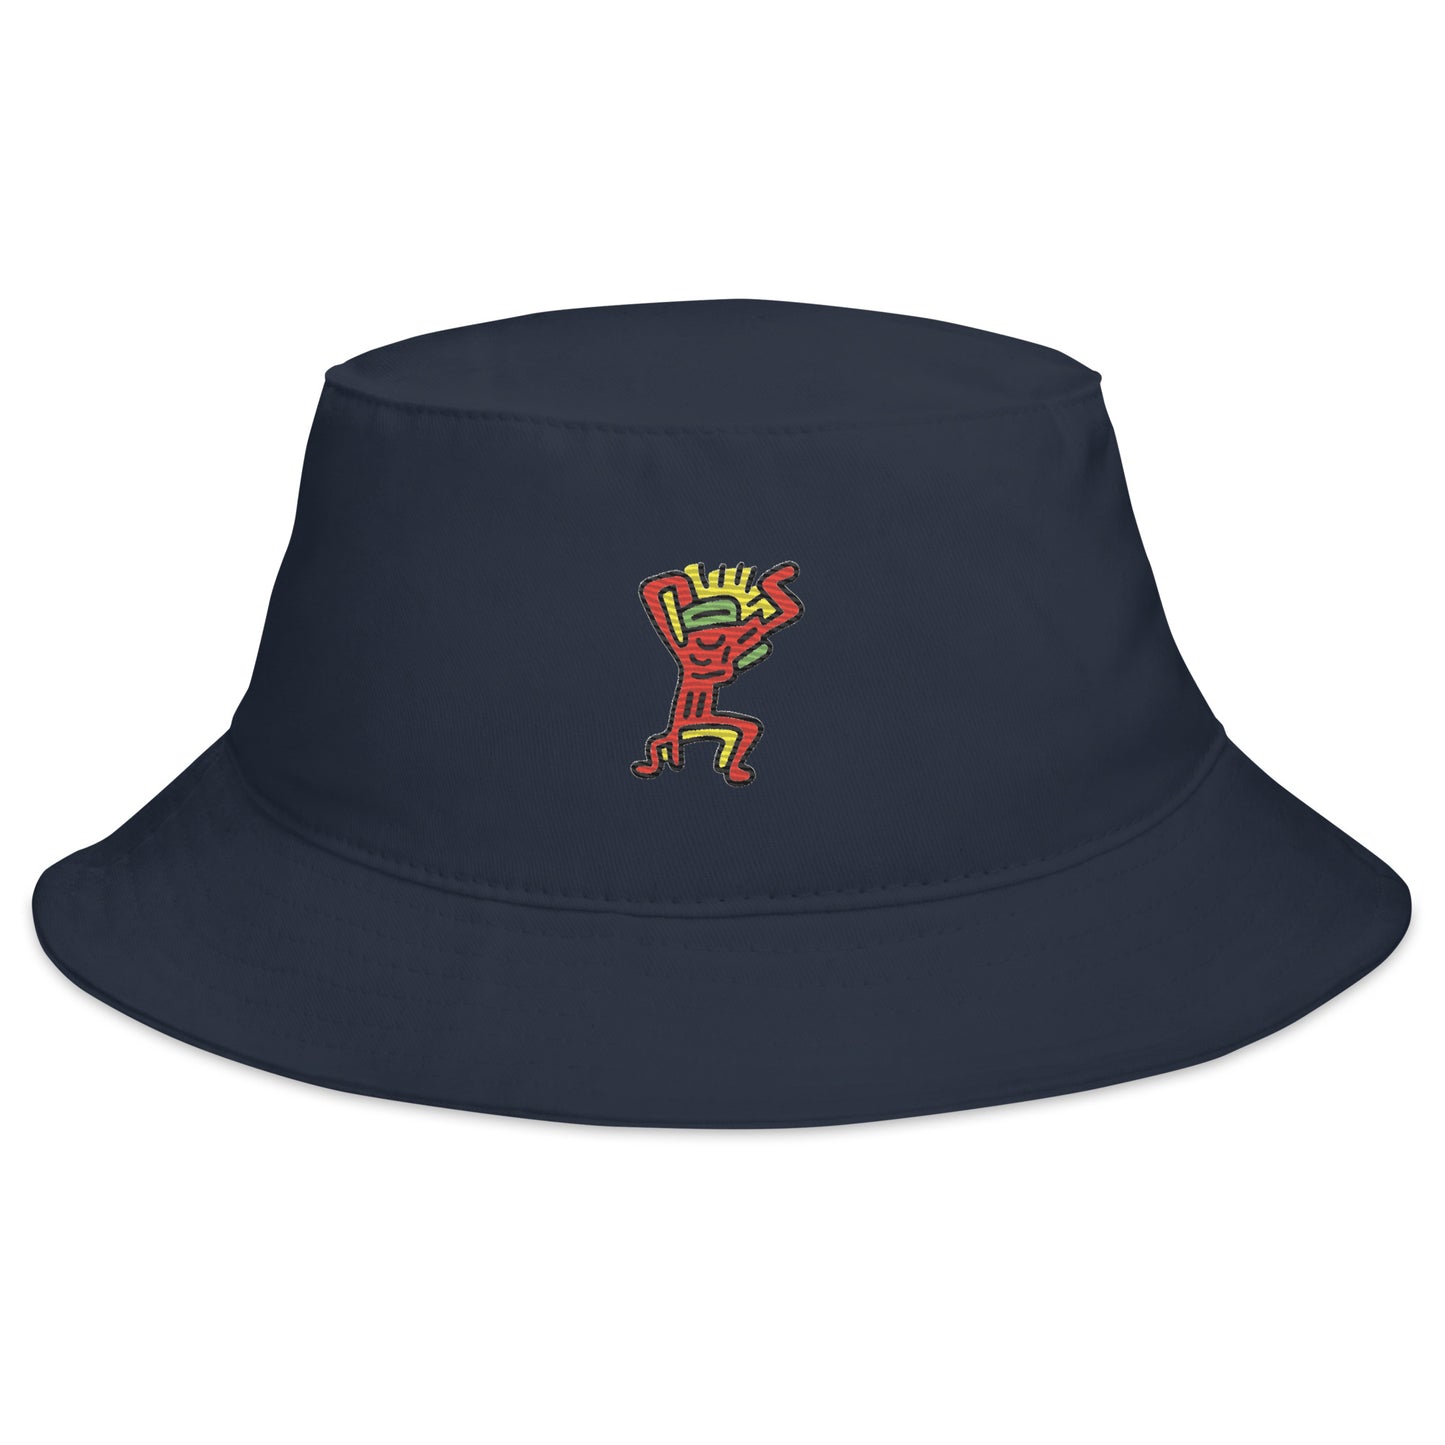 Doodles Me "Most Wanted" Bucket Hat #3